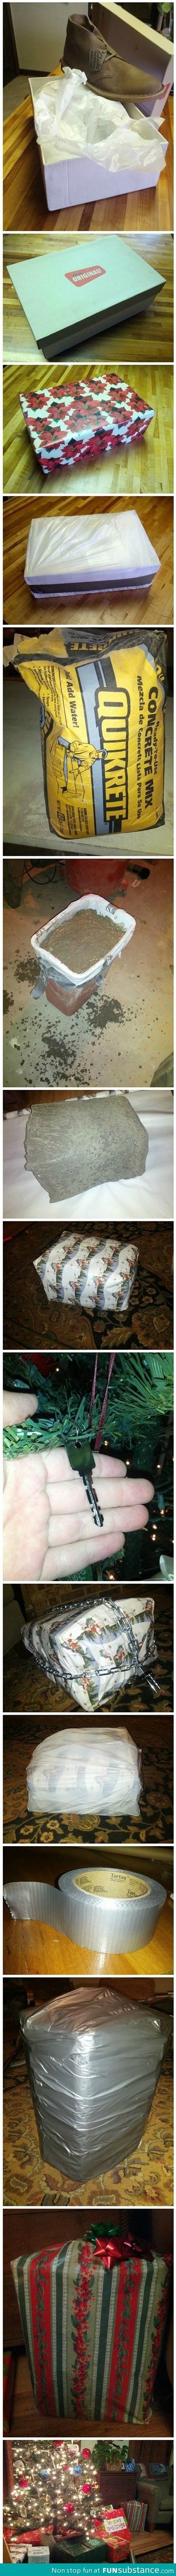 How to wrap gifts